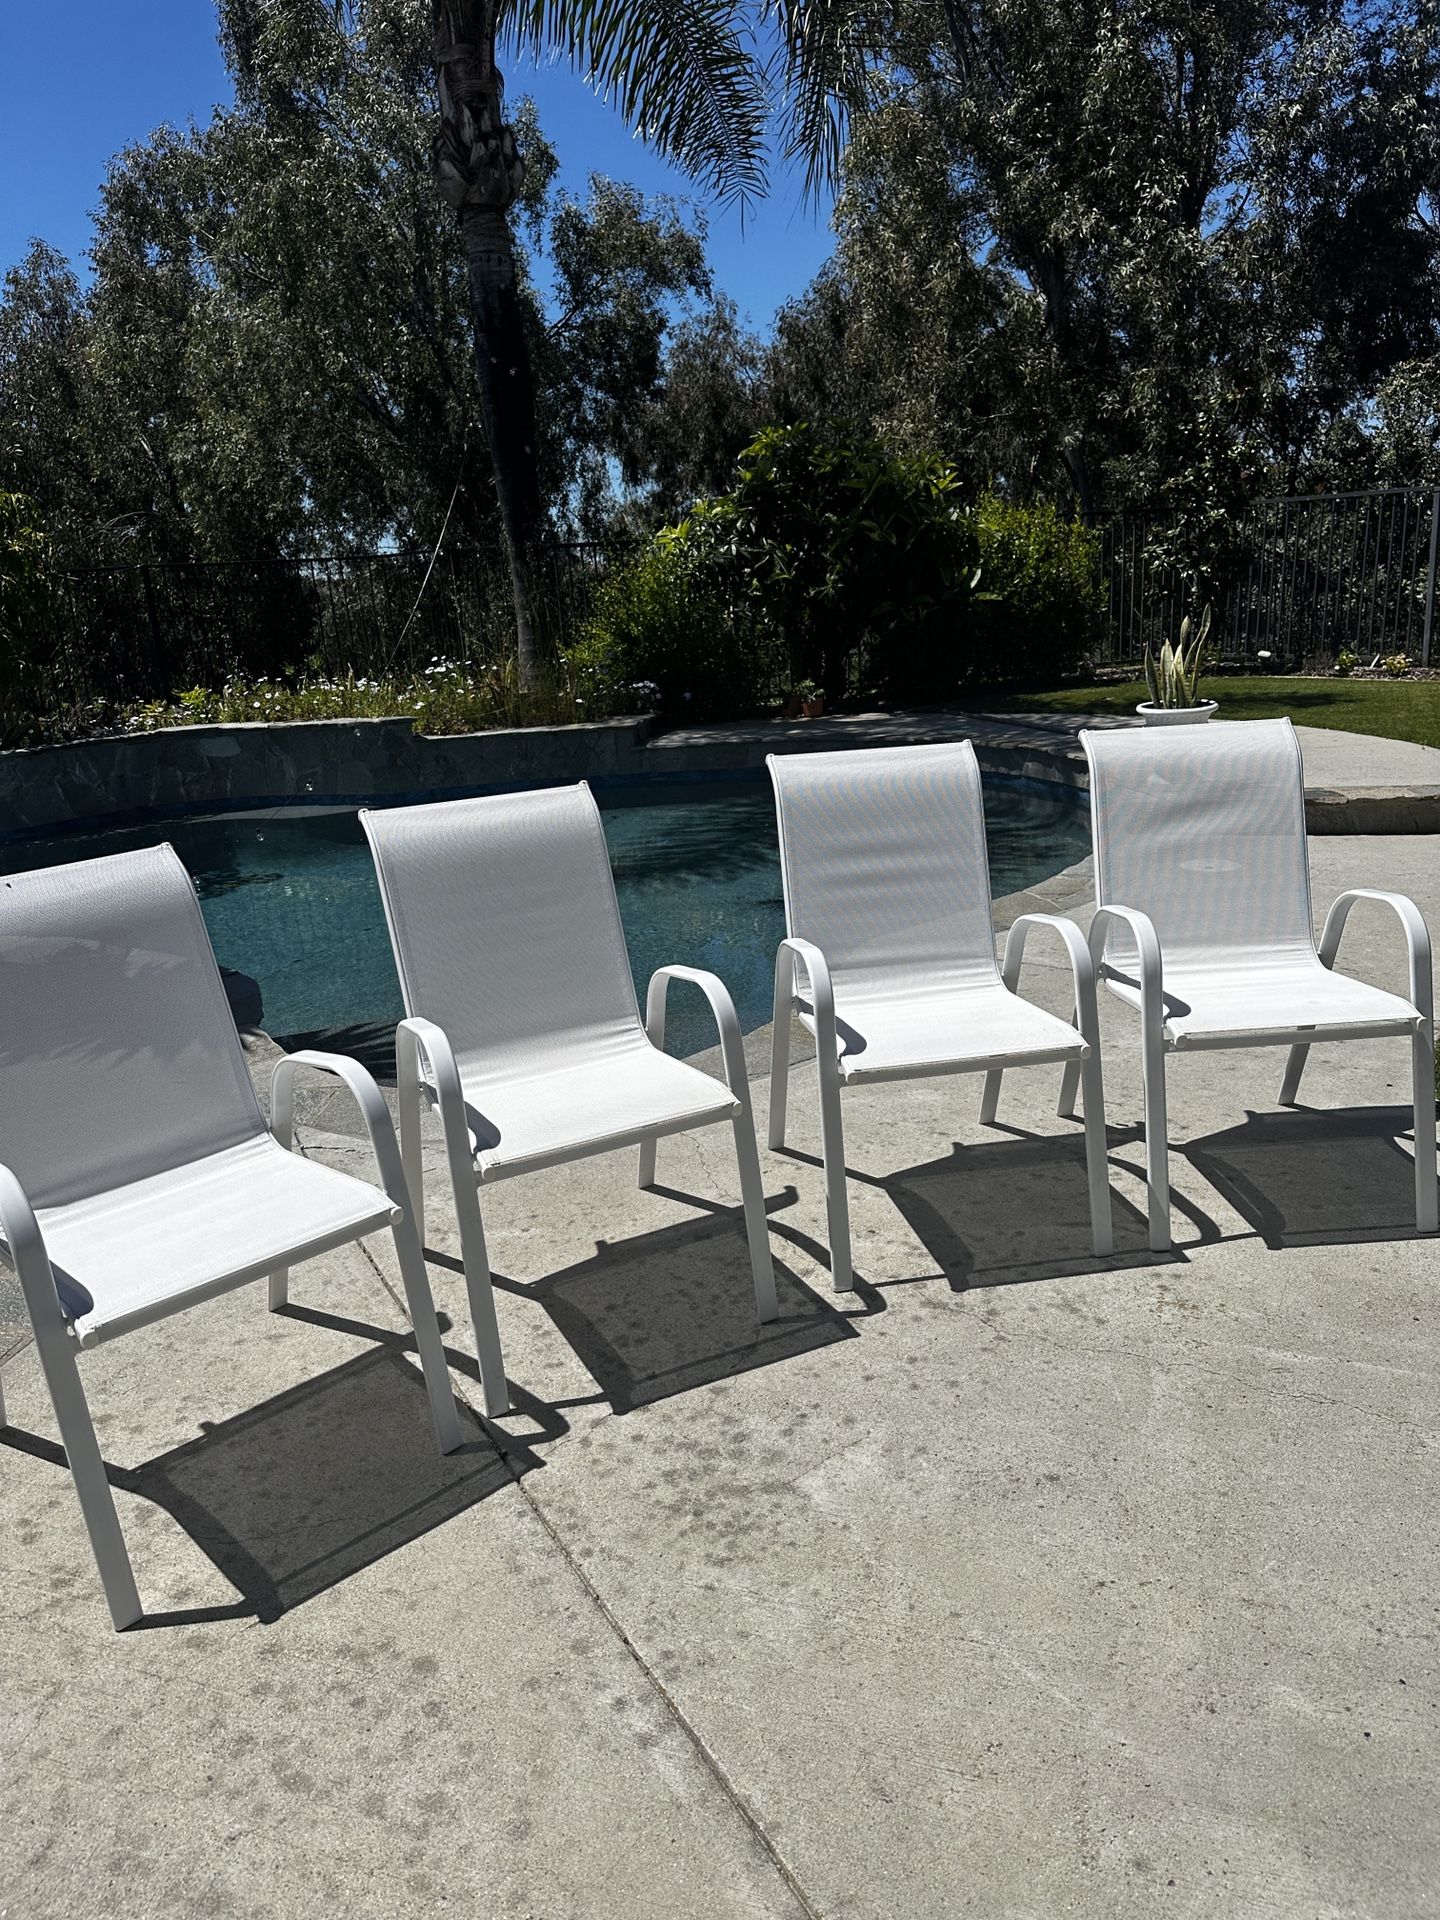 Patio , Pool,  And  Outdoor Chairs